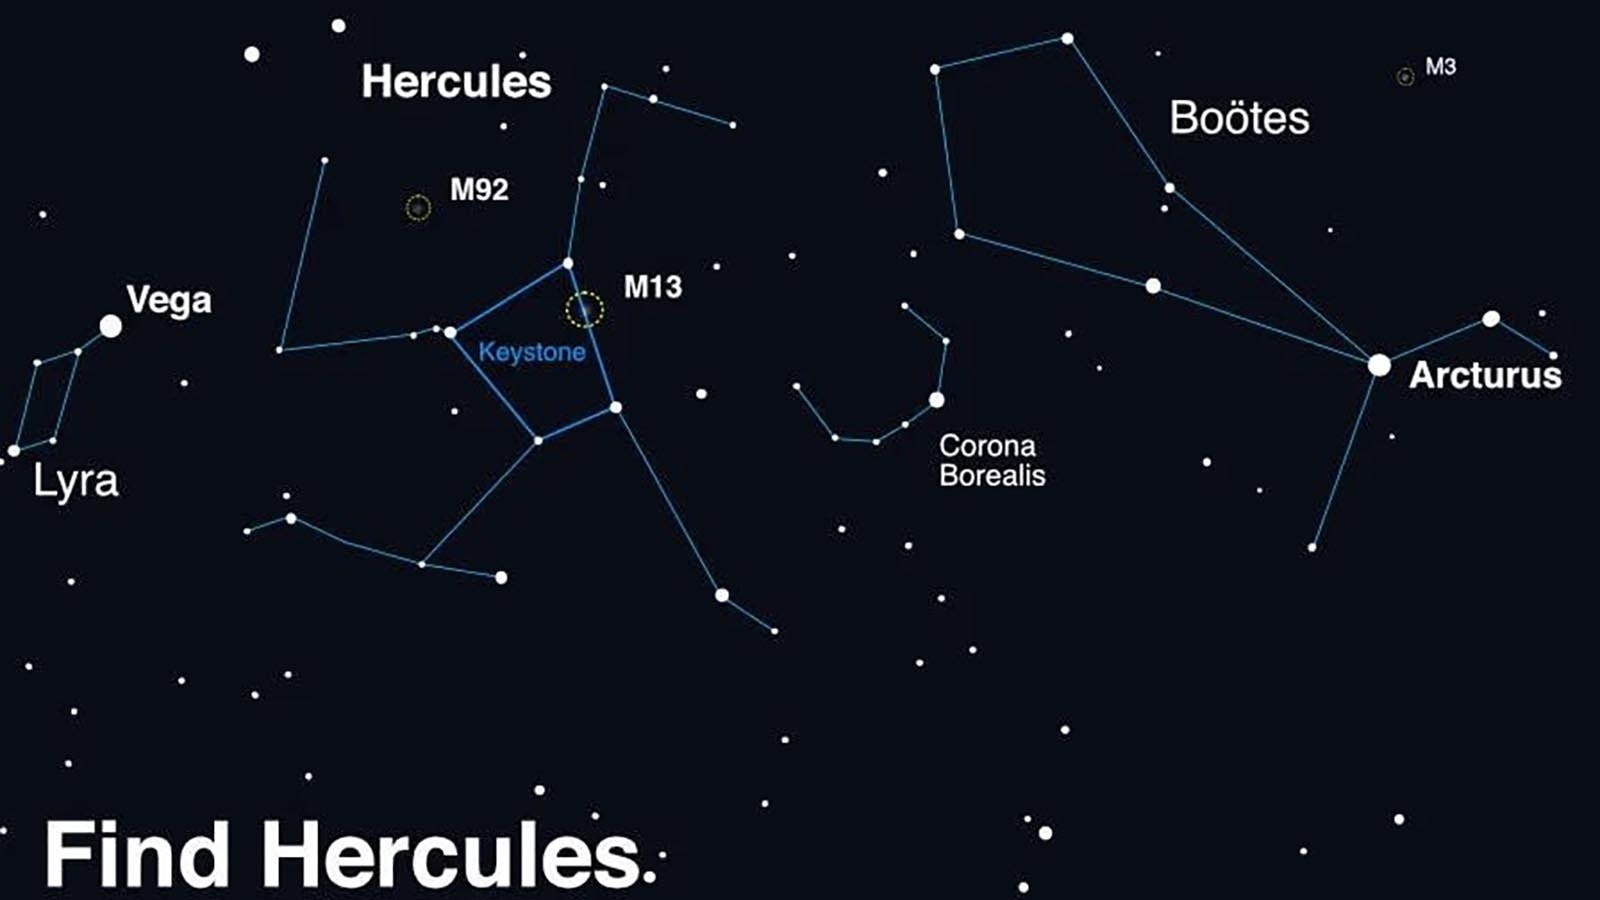 The T Corona Borealis can be found by looking for the constellation Hercules.